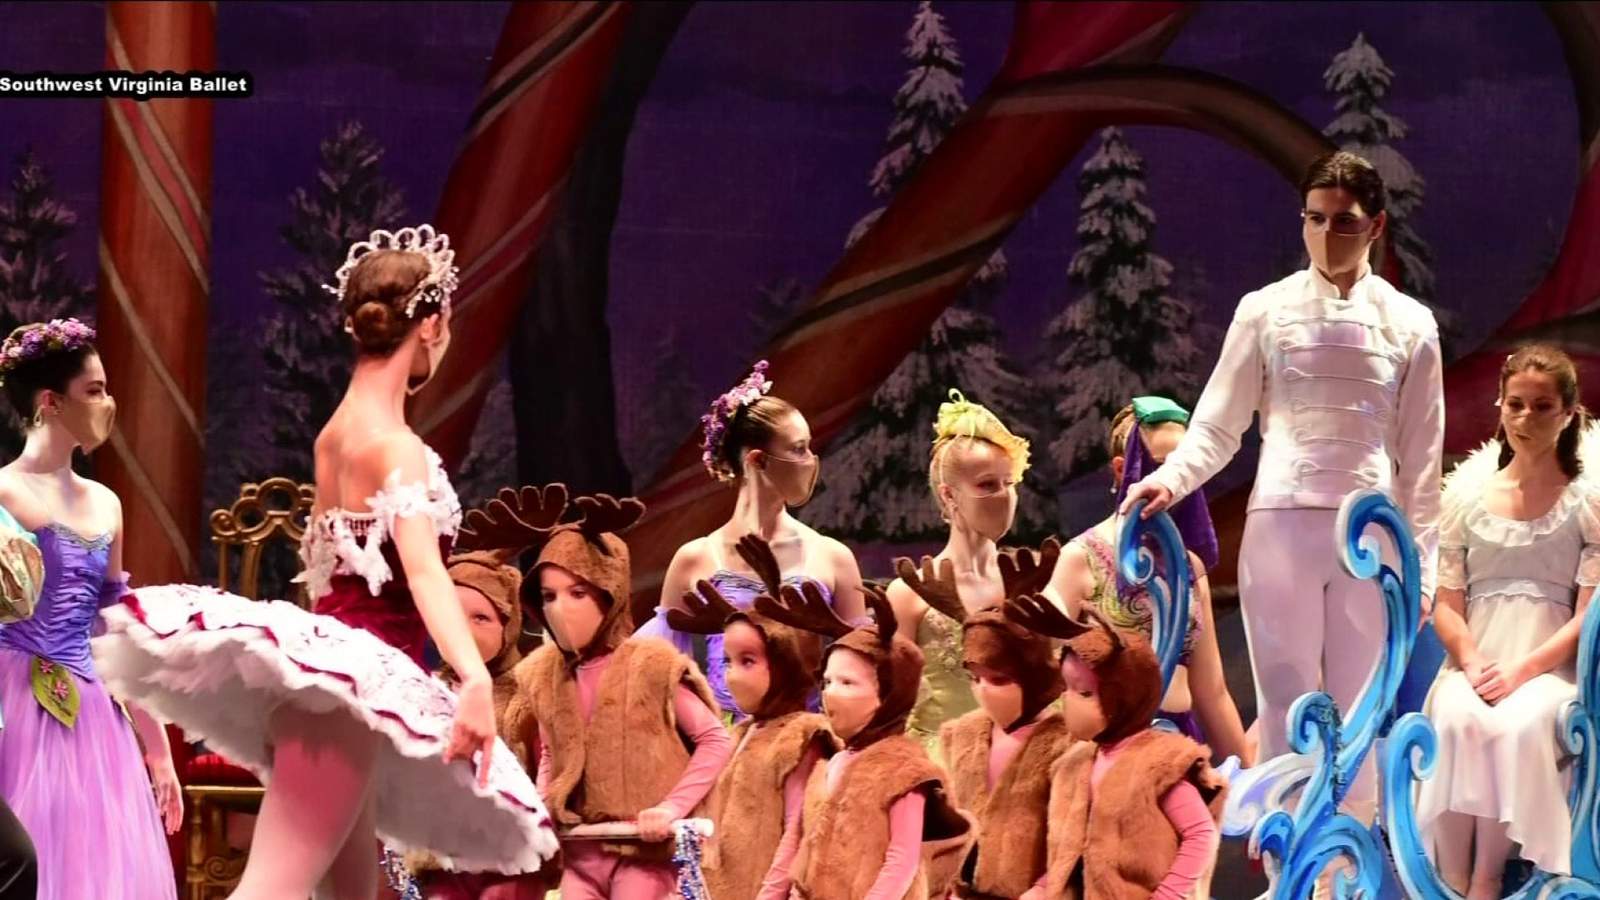 The Nutcracker brings holiday cheer to Carillion Clinic